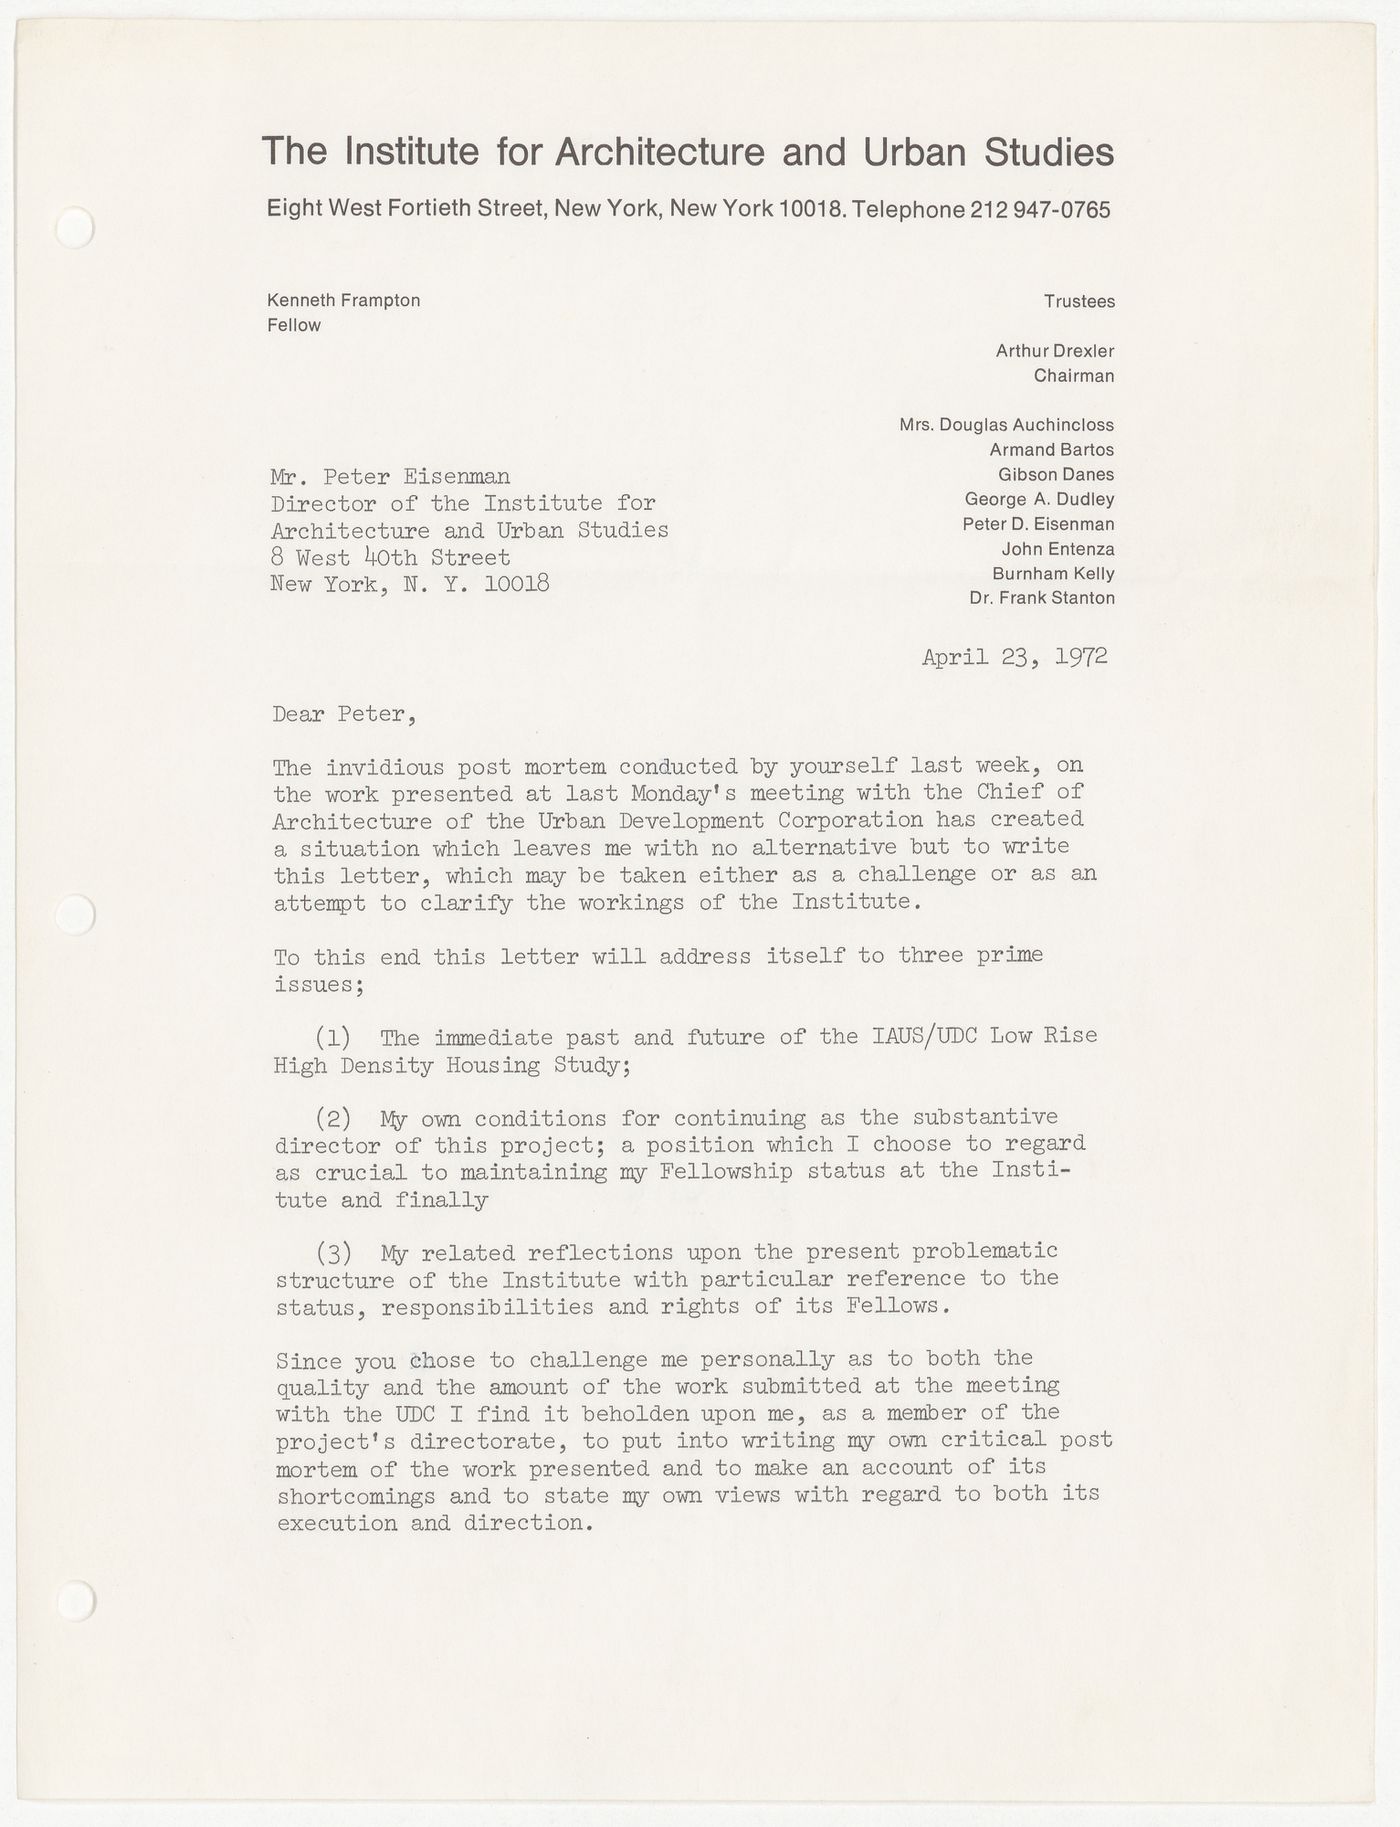 Letter from Kenneth Frampton to Peter D. Eisenman about presentation to the Urban Development Corporation (UDC) and a critique of the organizational structure of IAUS